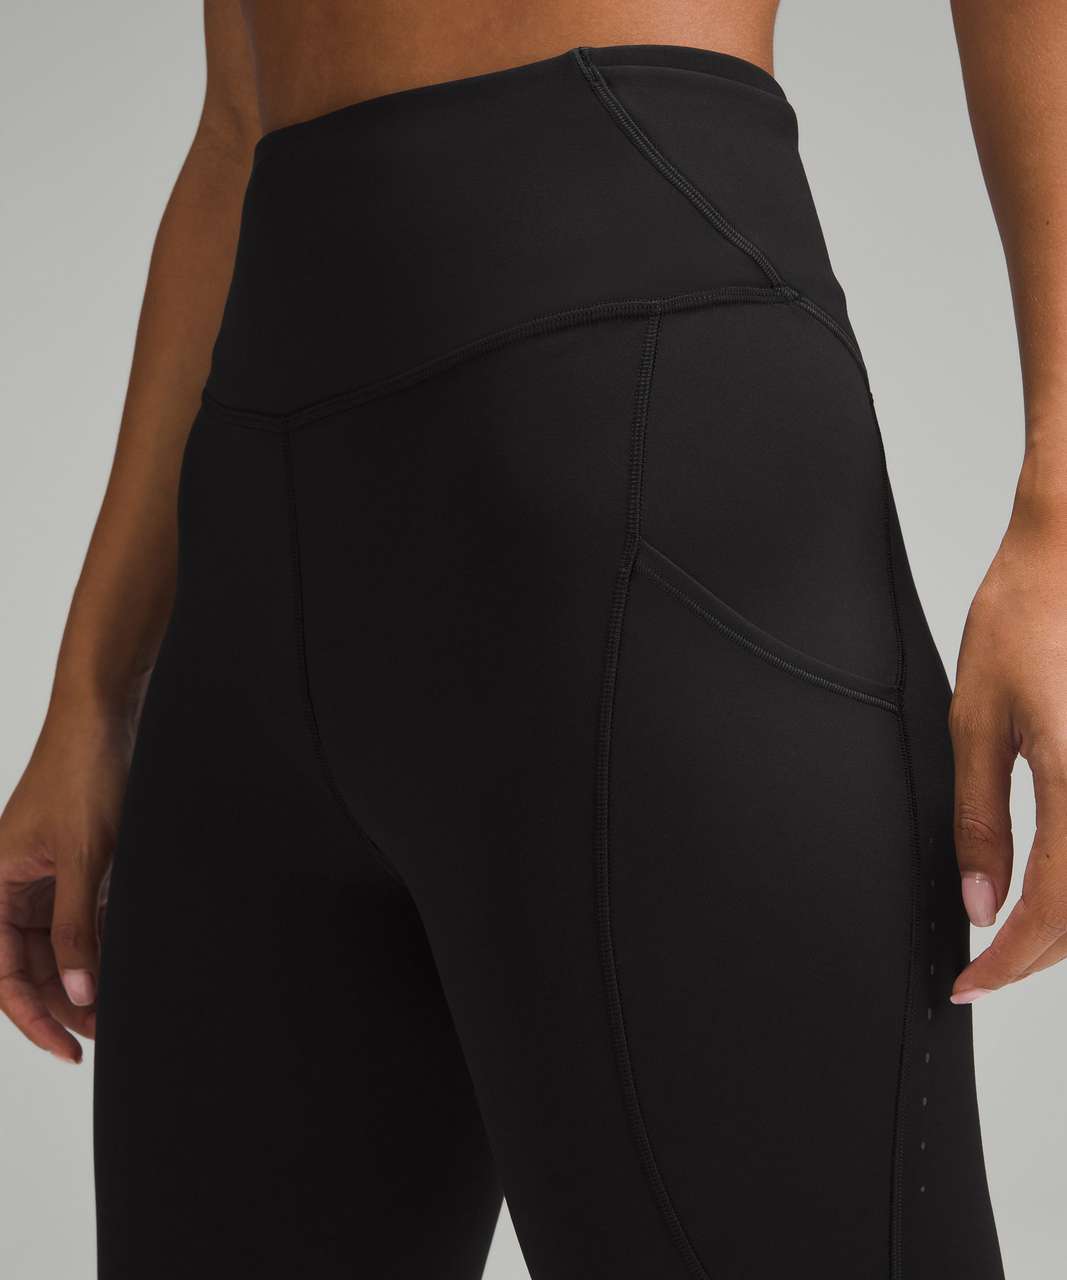 Lululemon Fast and Free High-Rise Fleece Tight 25 *Pockets